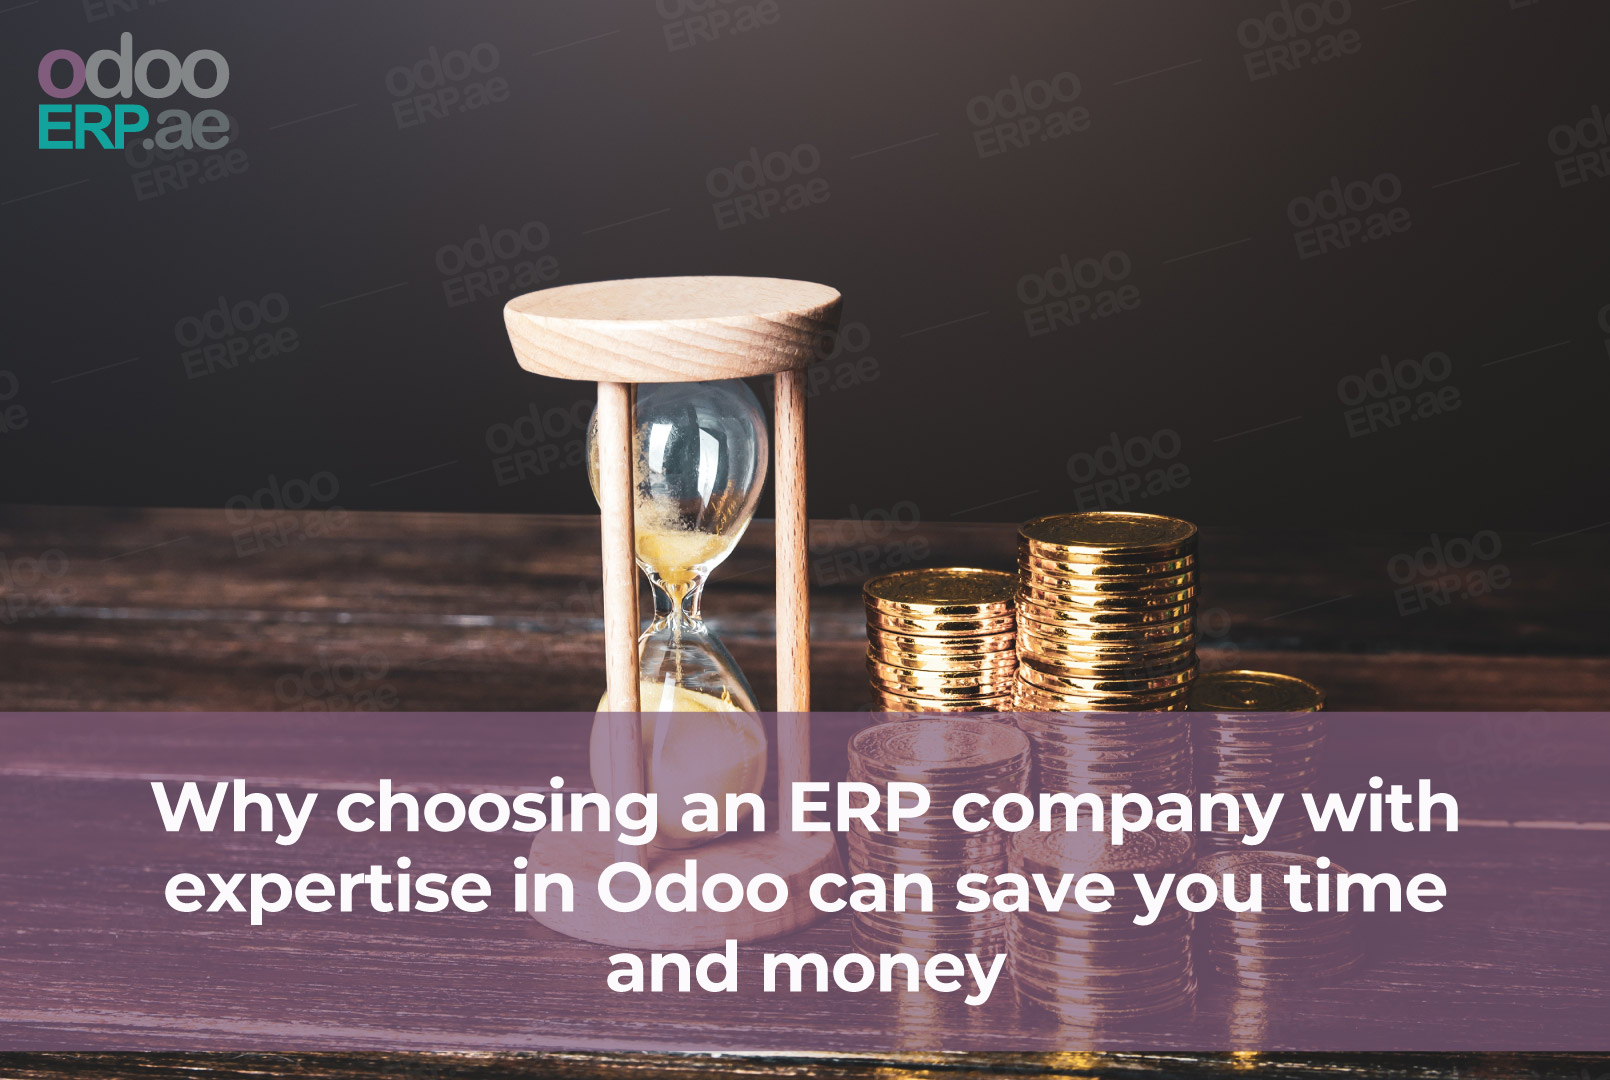 Why Choosing an ERP Software Company with Expertise in Odoo Can Save You Time and Money